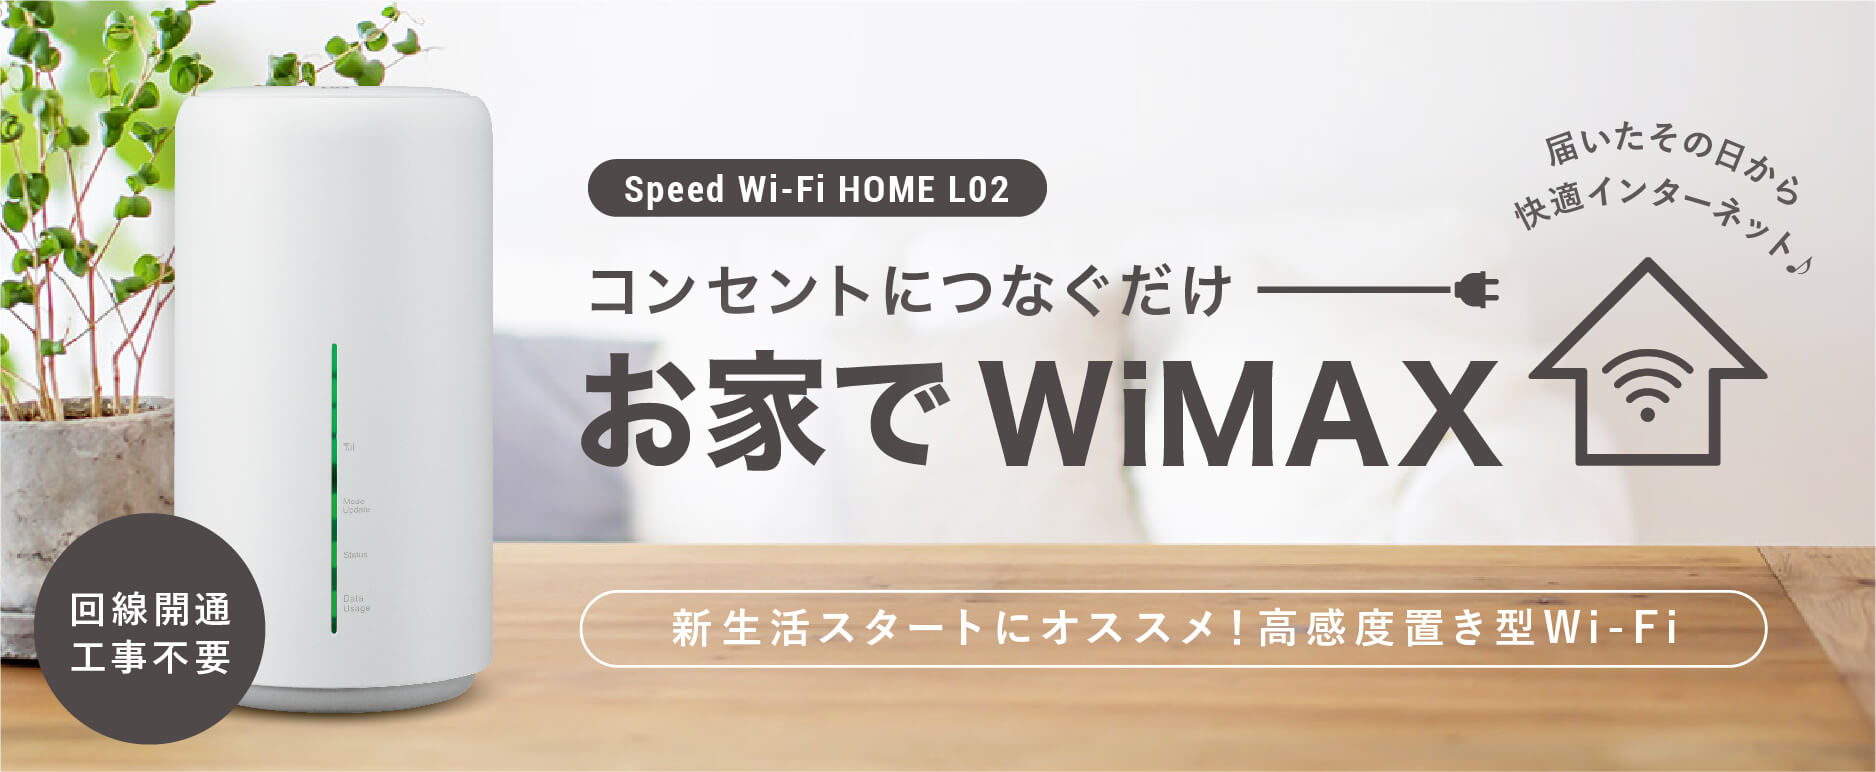 【Speed Wi-Fi HOME L02】コンセントにつなぐだけ お家でWiMAX